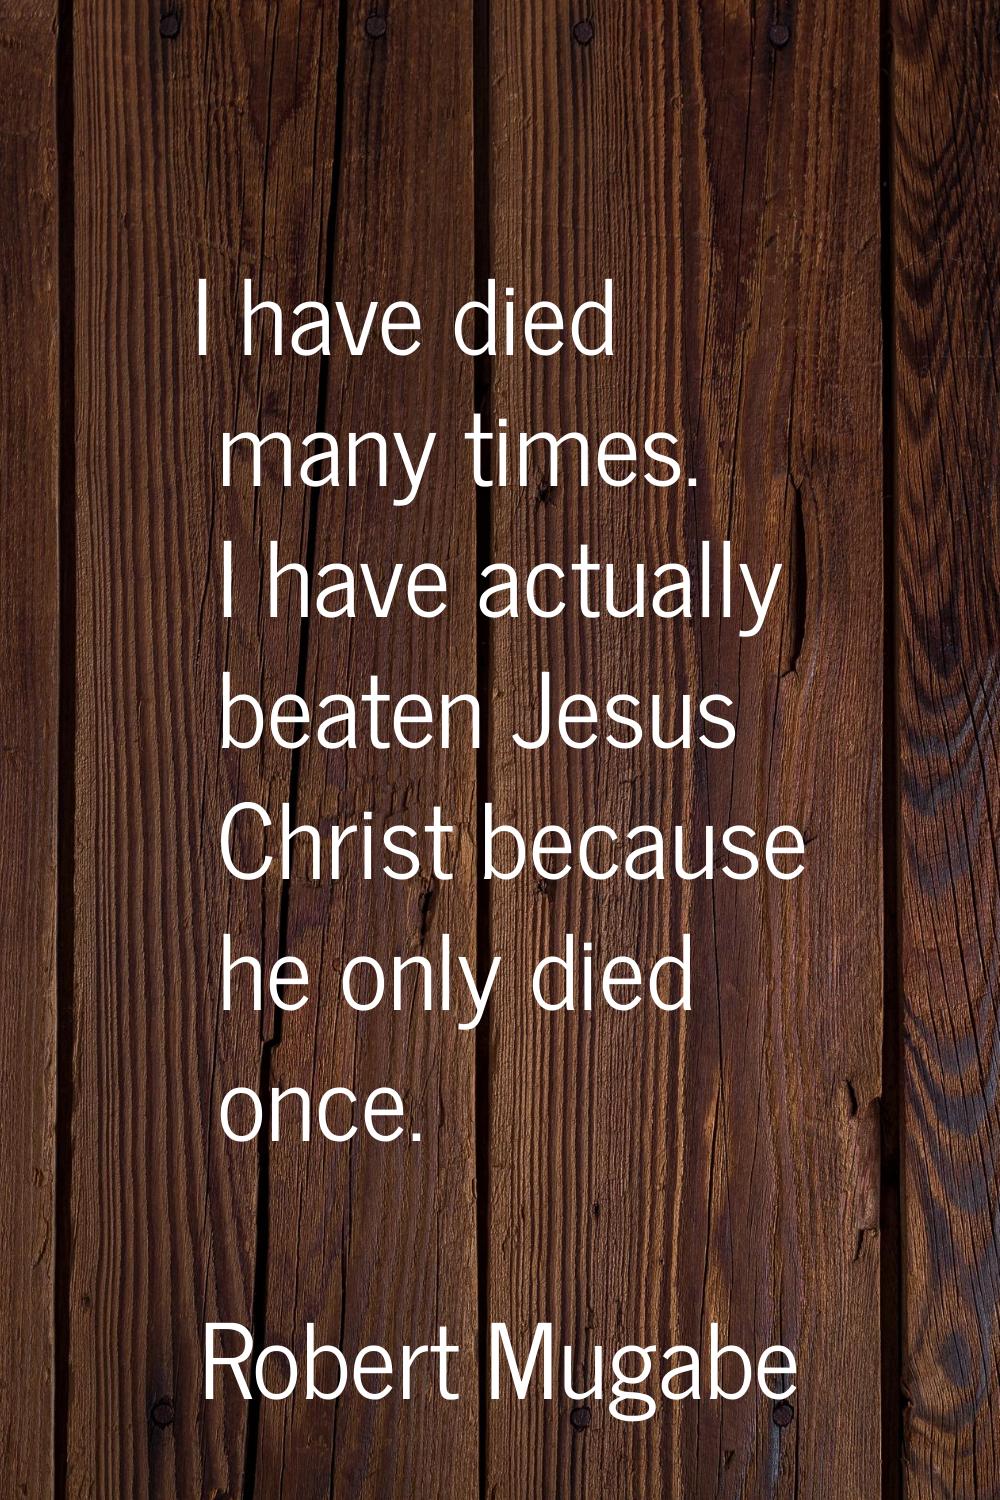 I have died many times. I have actually beaten Jesus Christ because he only died once.